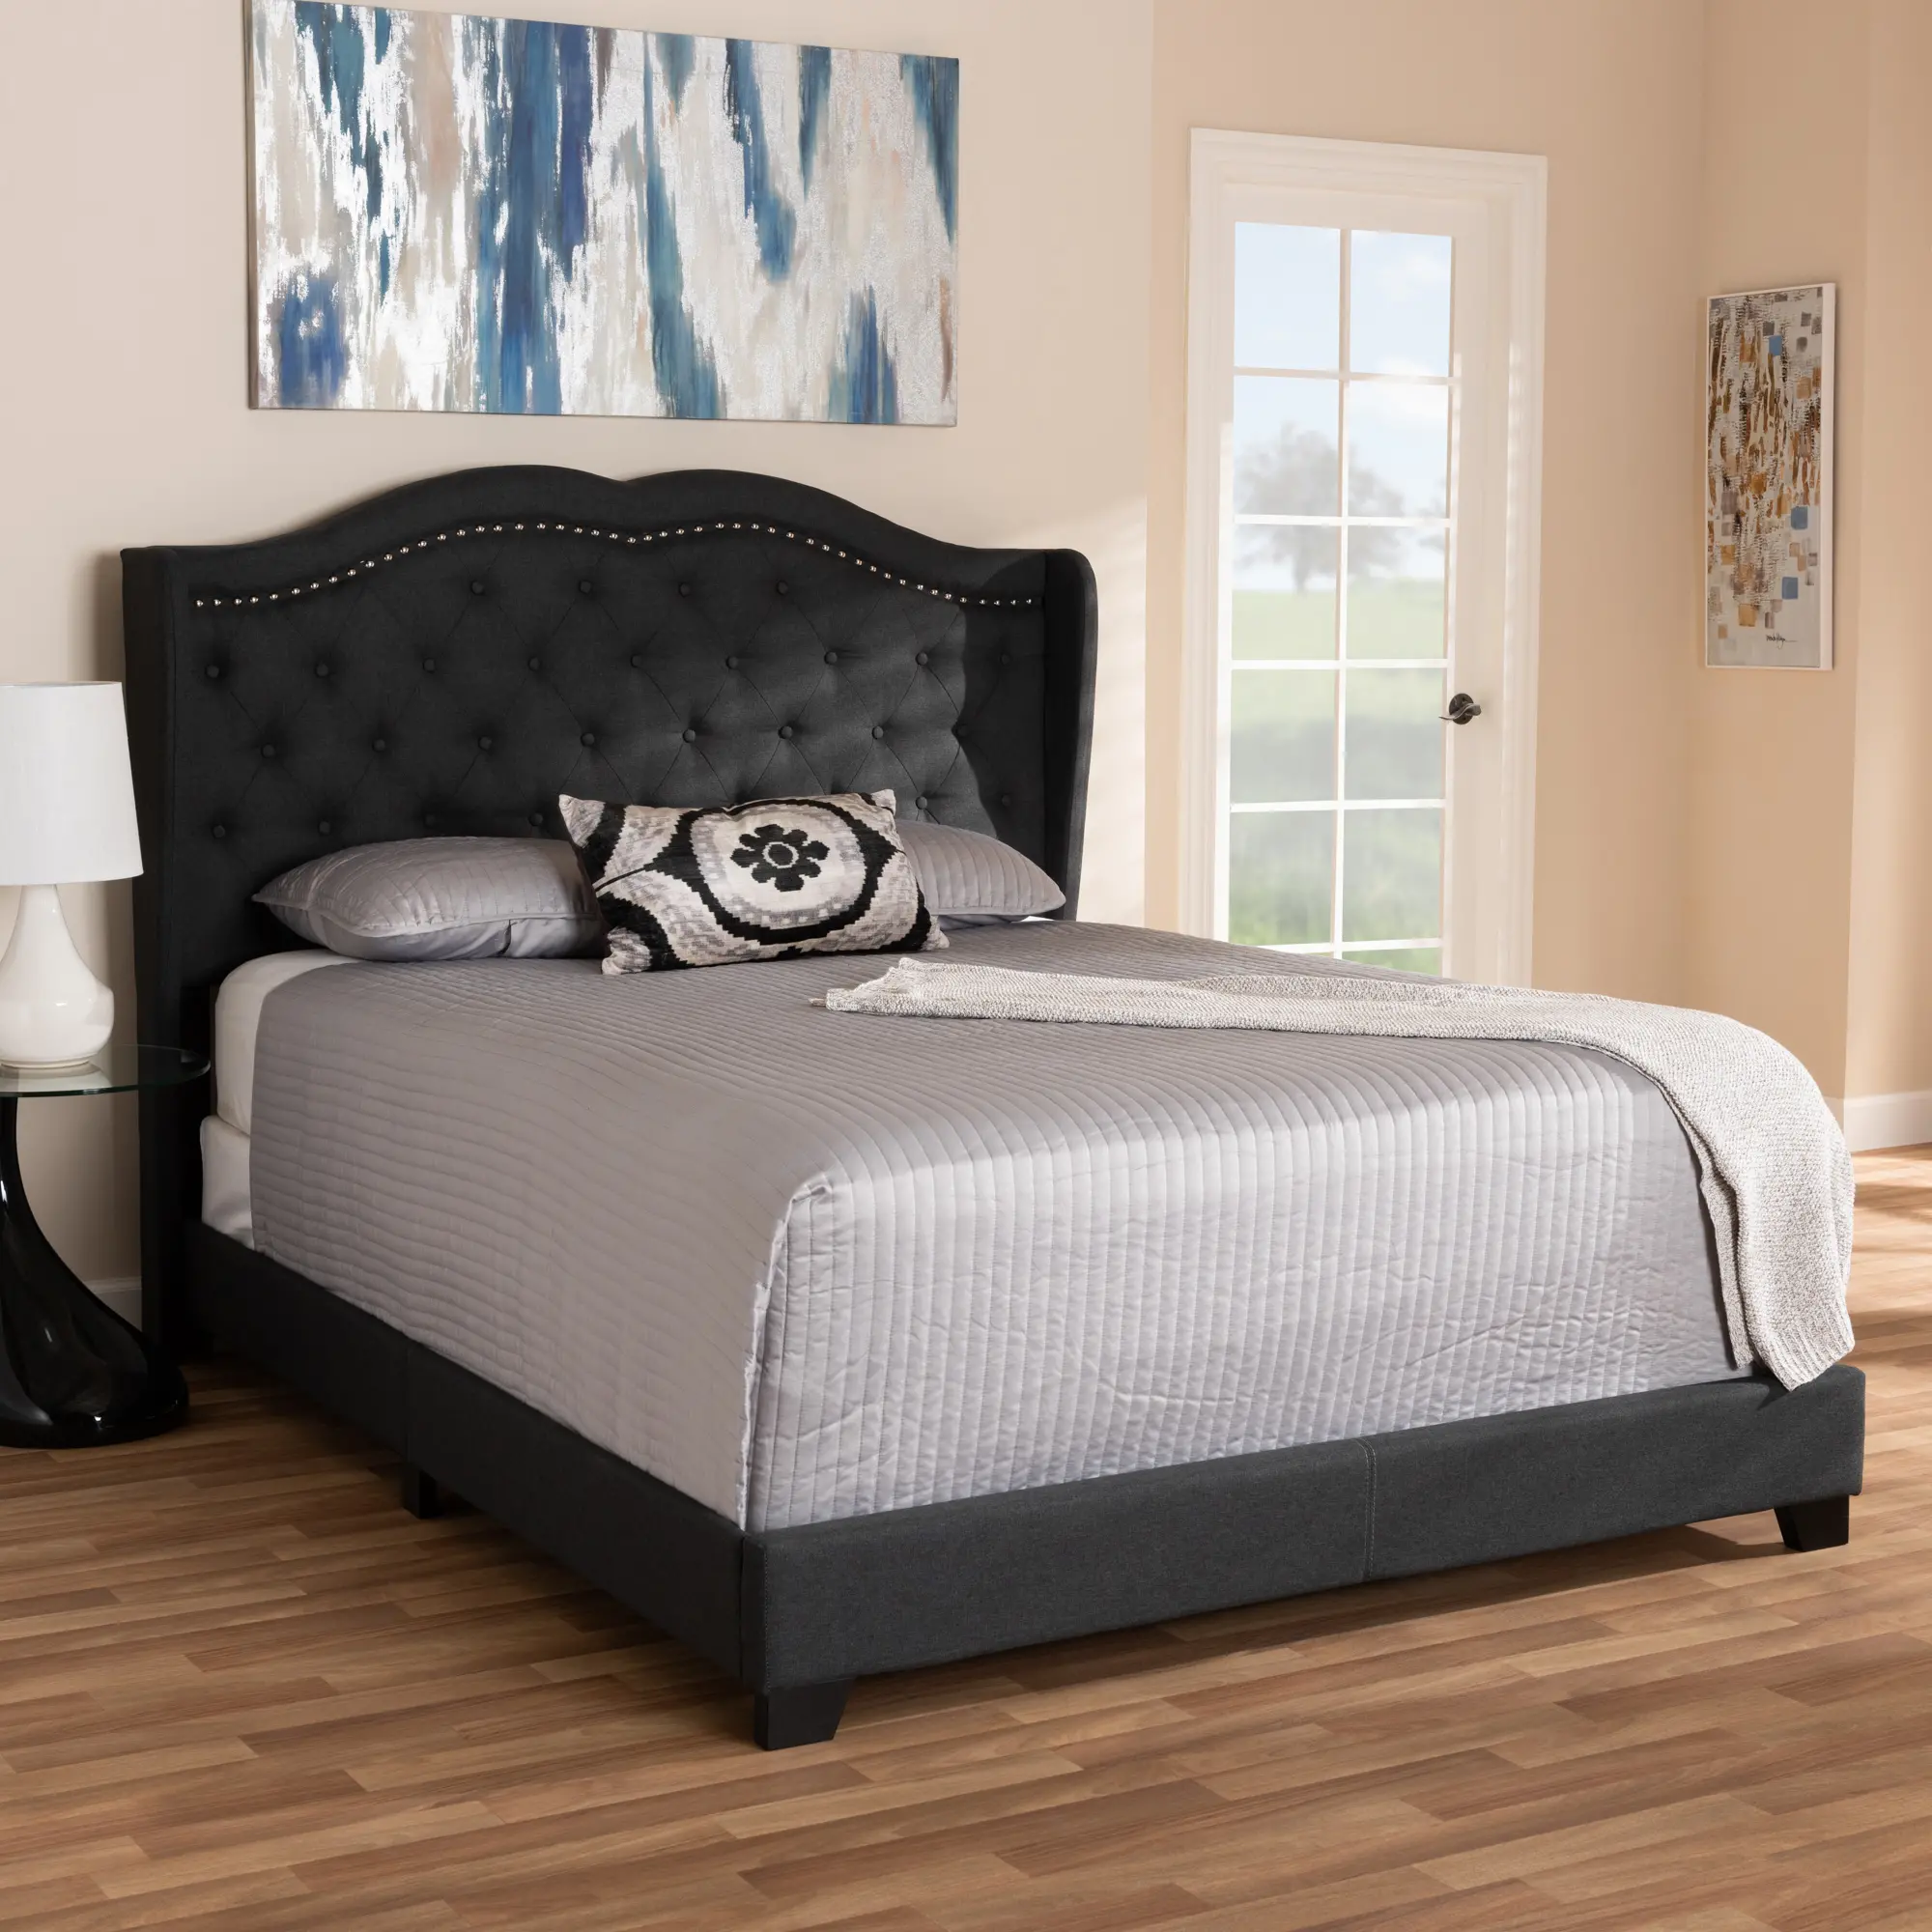 149-8927-RCW Contemporary Charcoal Gray Upholstered Queen Bed - sku 149-8927-RCW